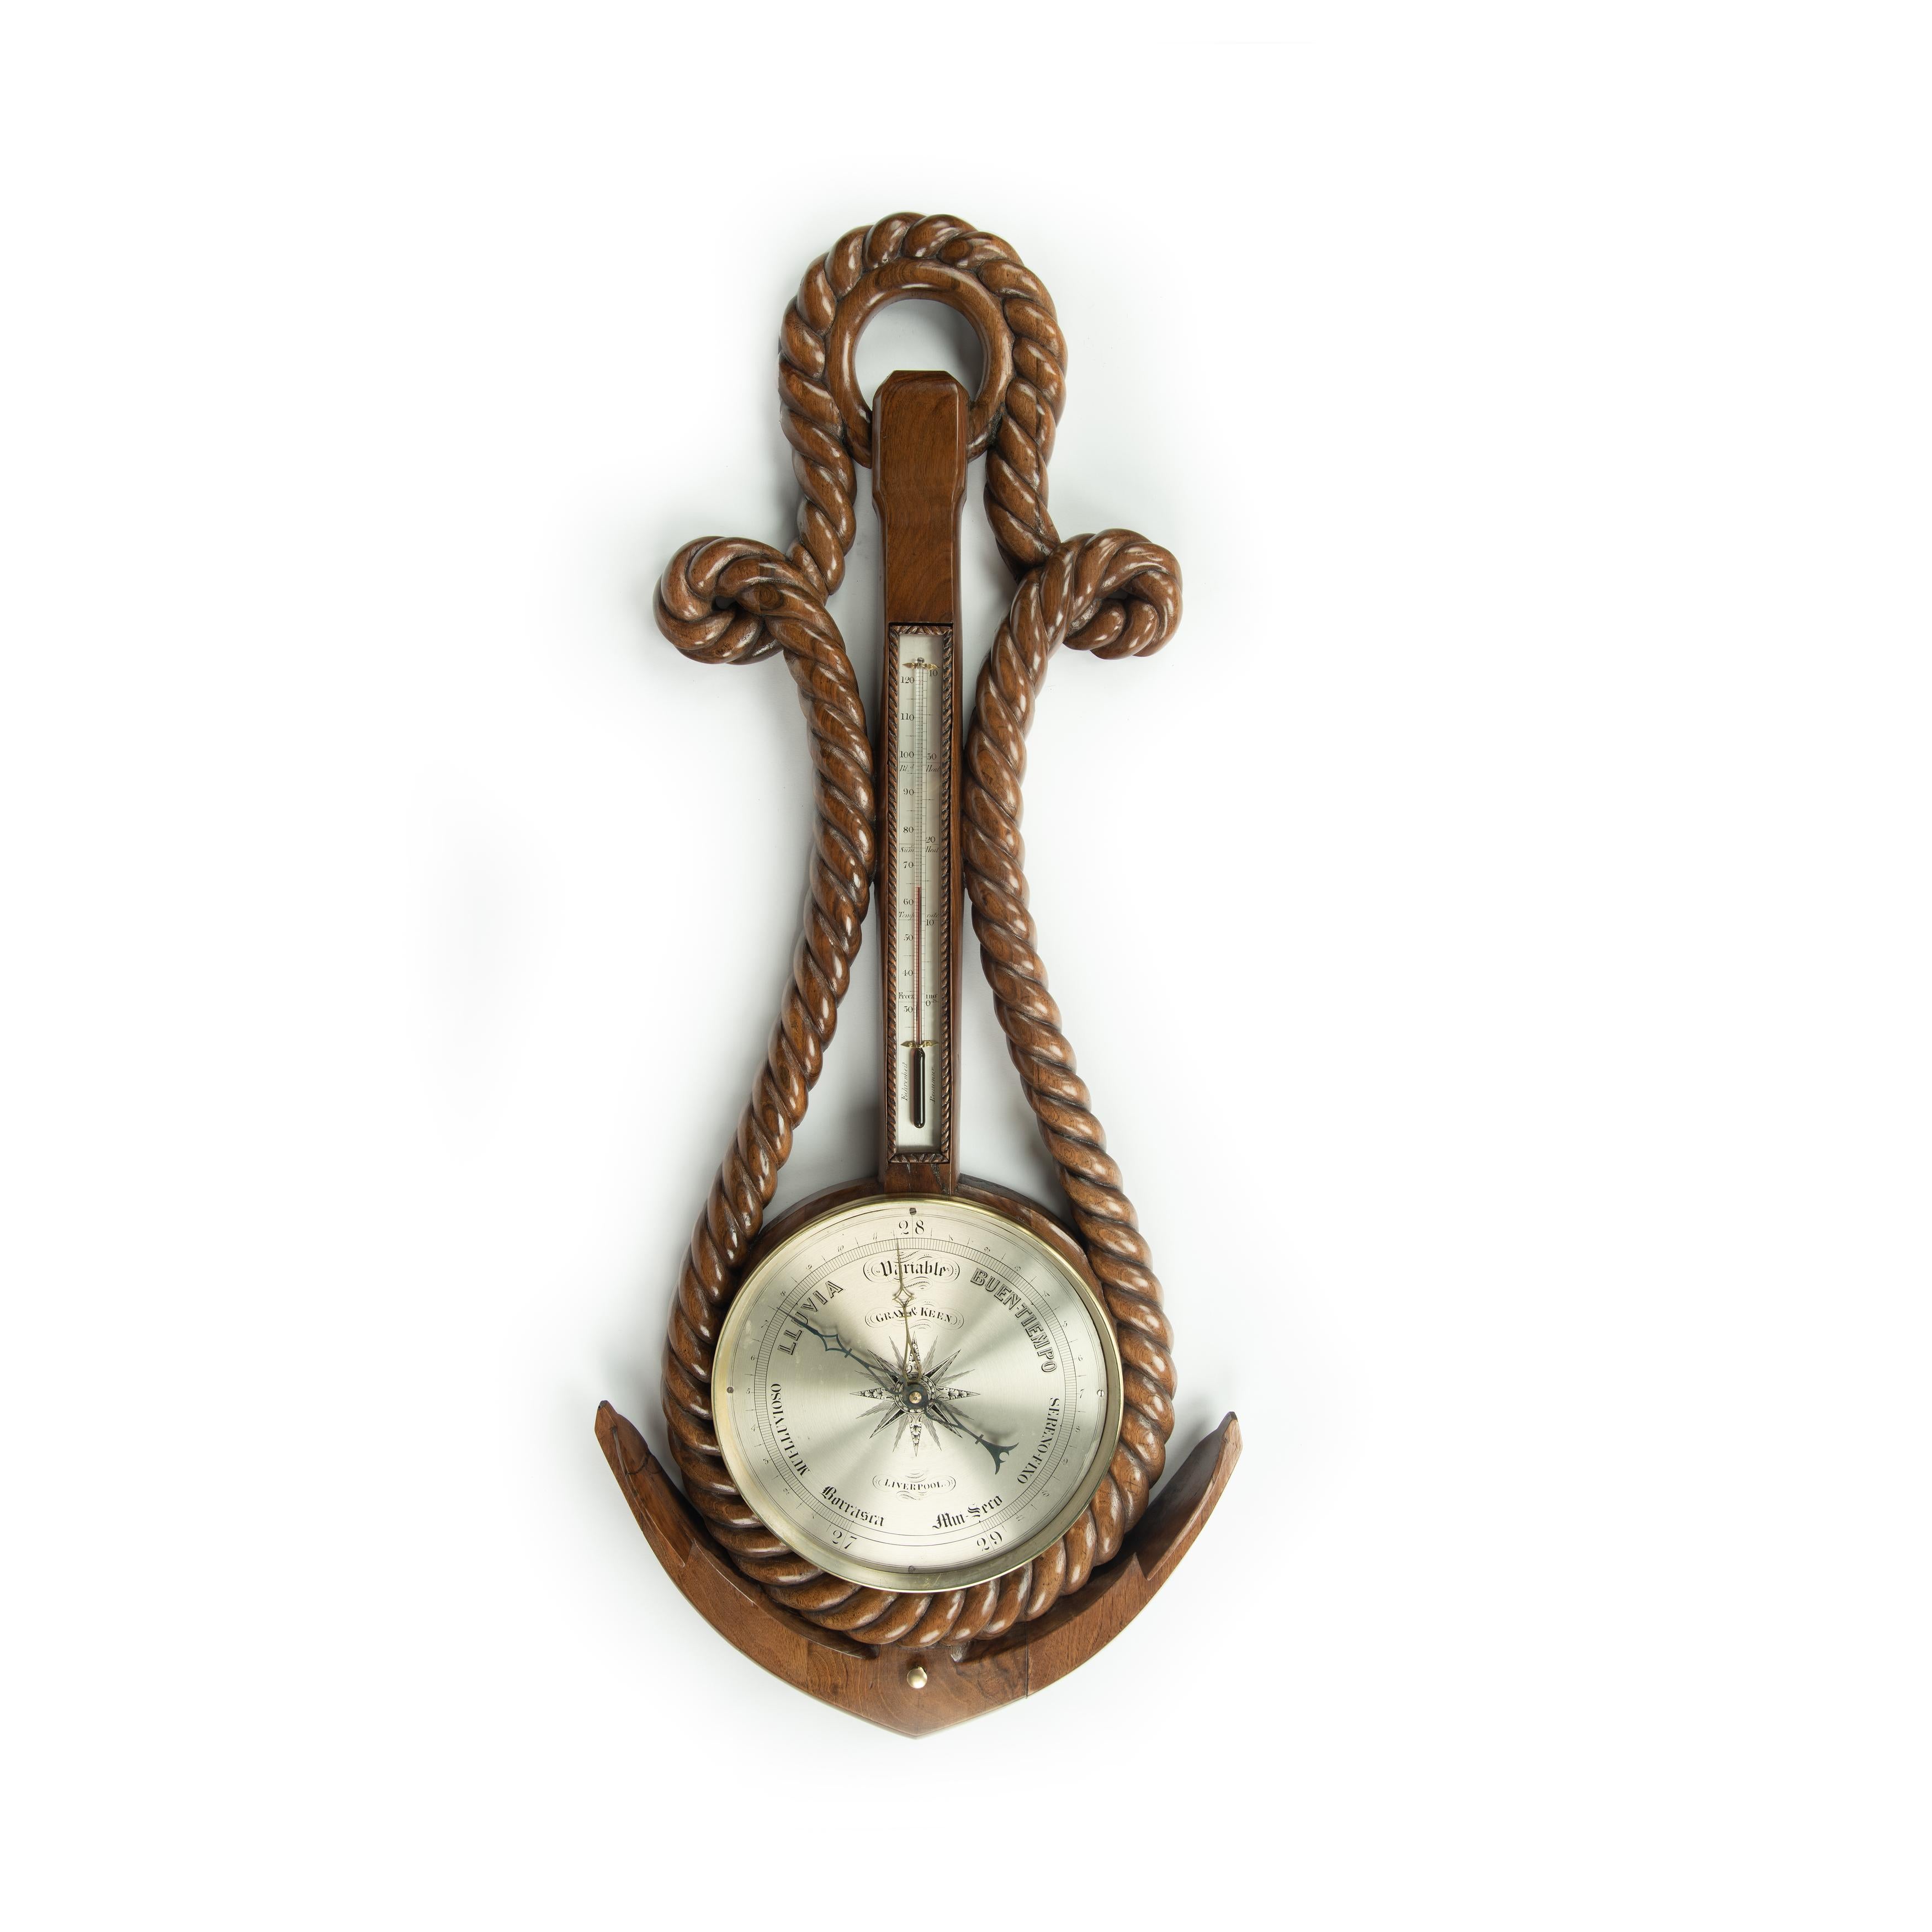 A Victorian anchor and rope barometer by Gray and Keen, Liverpool. The 10 ¾-inch silvered dial of this walnut barometer is set within the arms of an anchor and a coil of double twisted rope which passes over a ring handle.  The dial is inscribed in